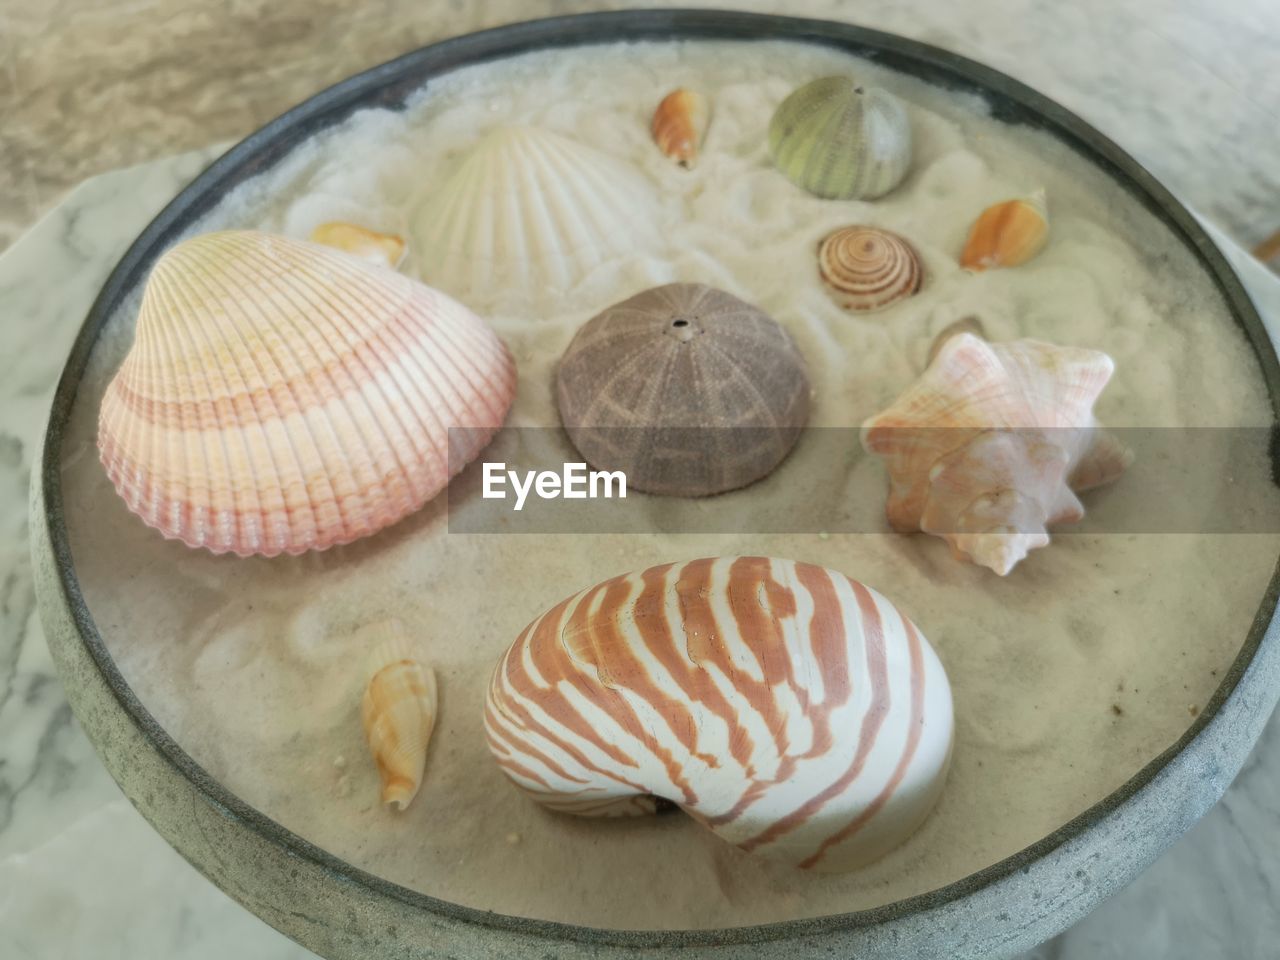 HIGH ANGLE VIEW OF SEASHELLS IN PLATE